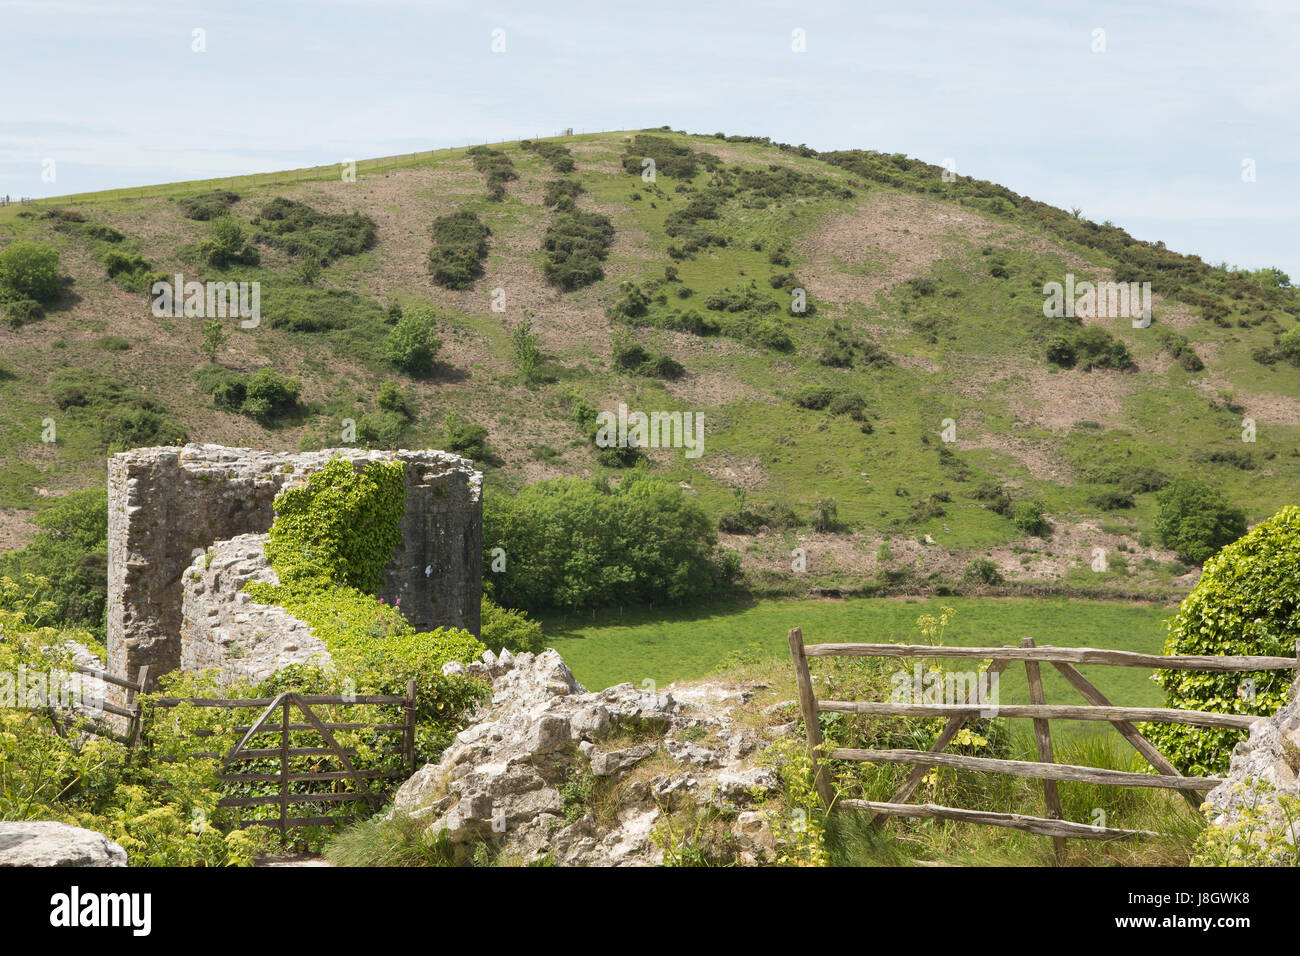 View of a colourful green hill on the Isle of Purbeck in Dorset. Stock Photo